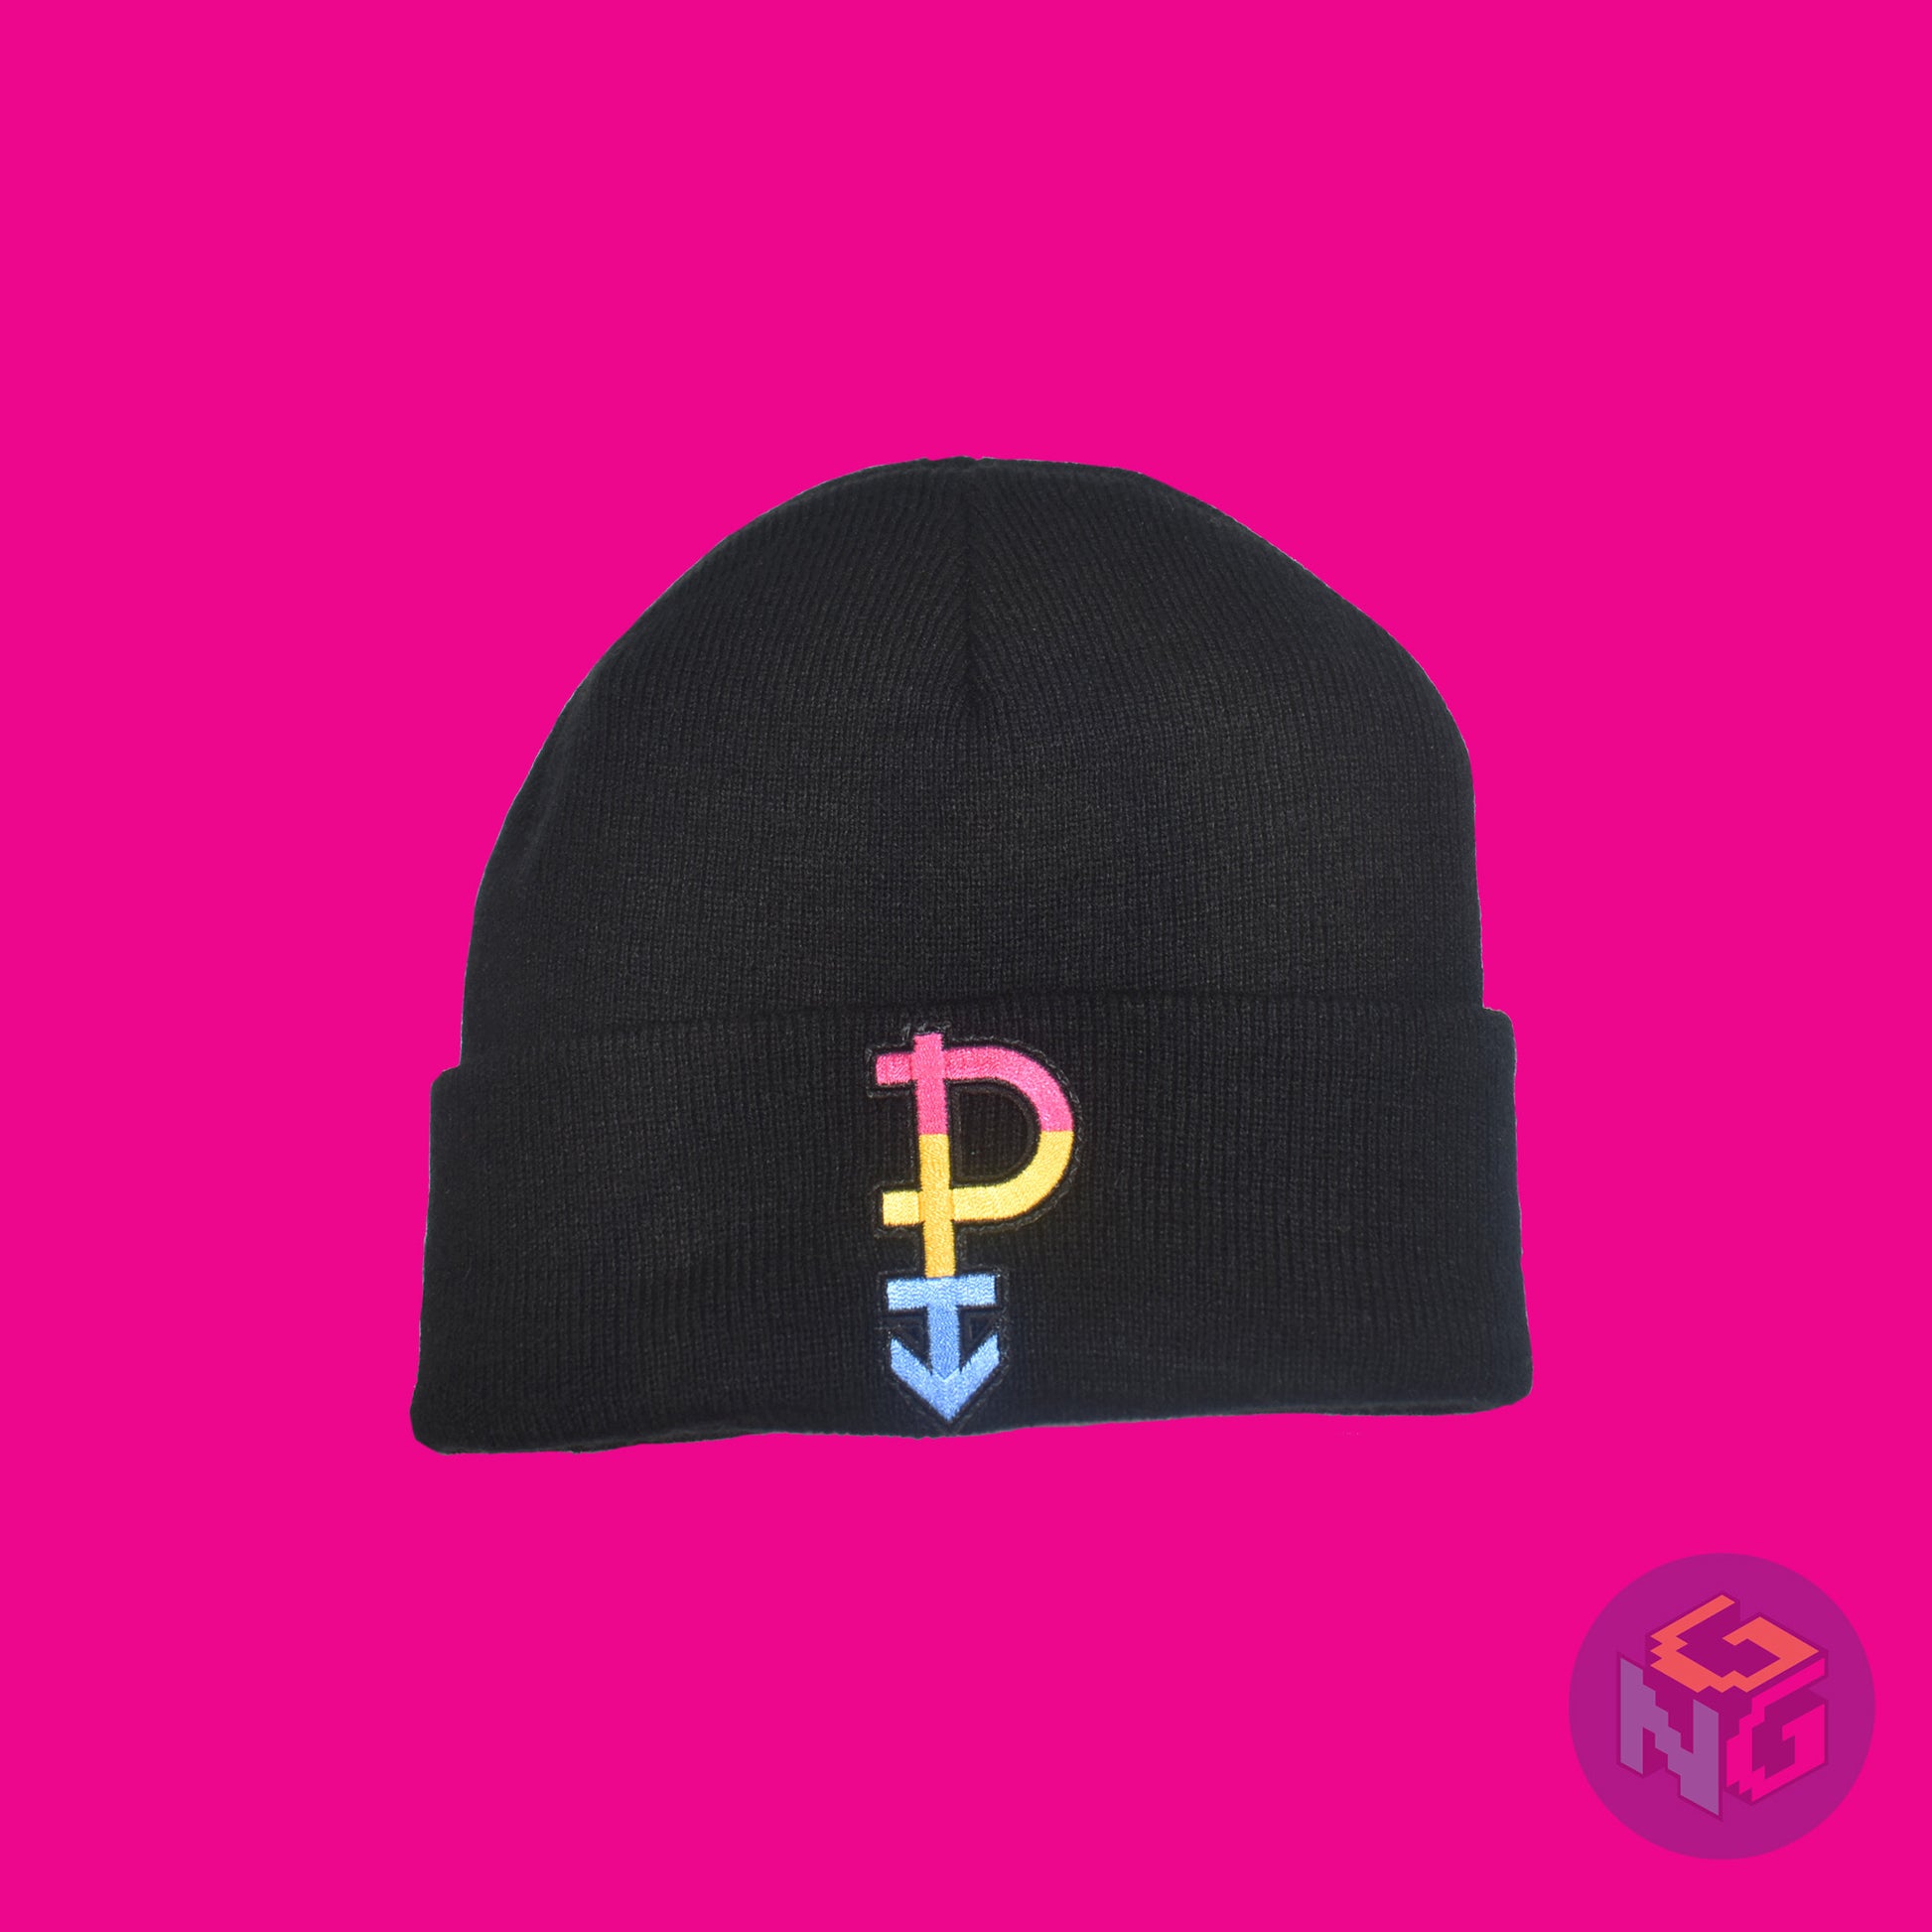 Black knit fabric beanie with the pansexual symbol in pink, yellow, and blue on the front. It is laying flat on a pink background